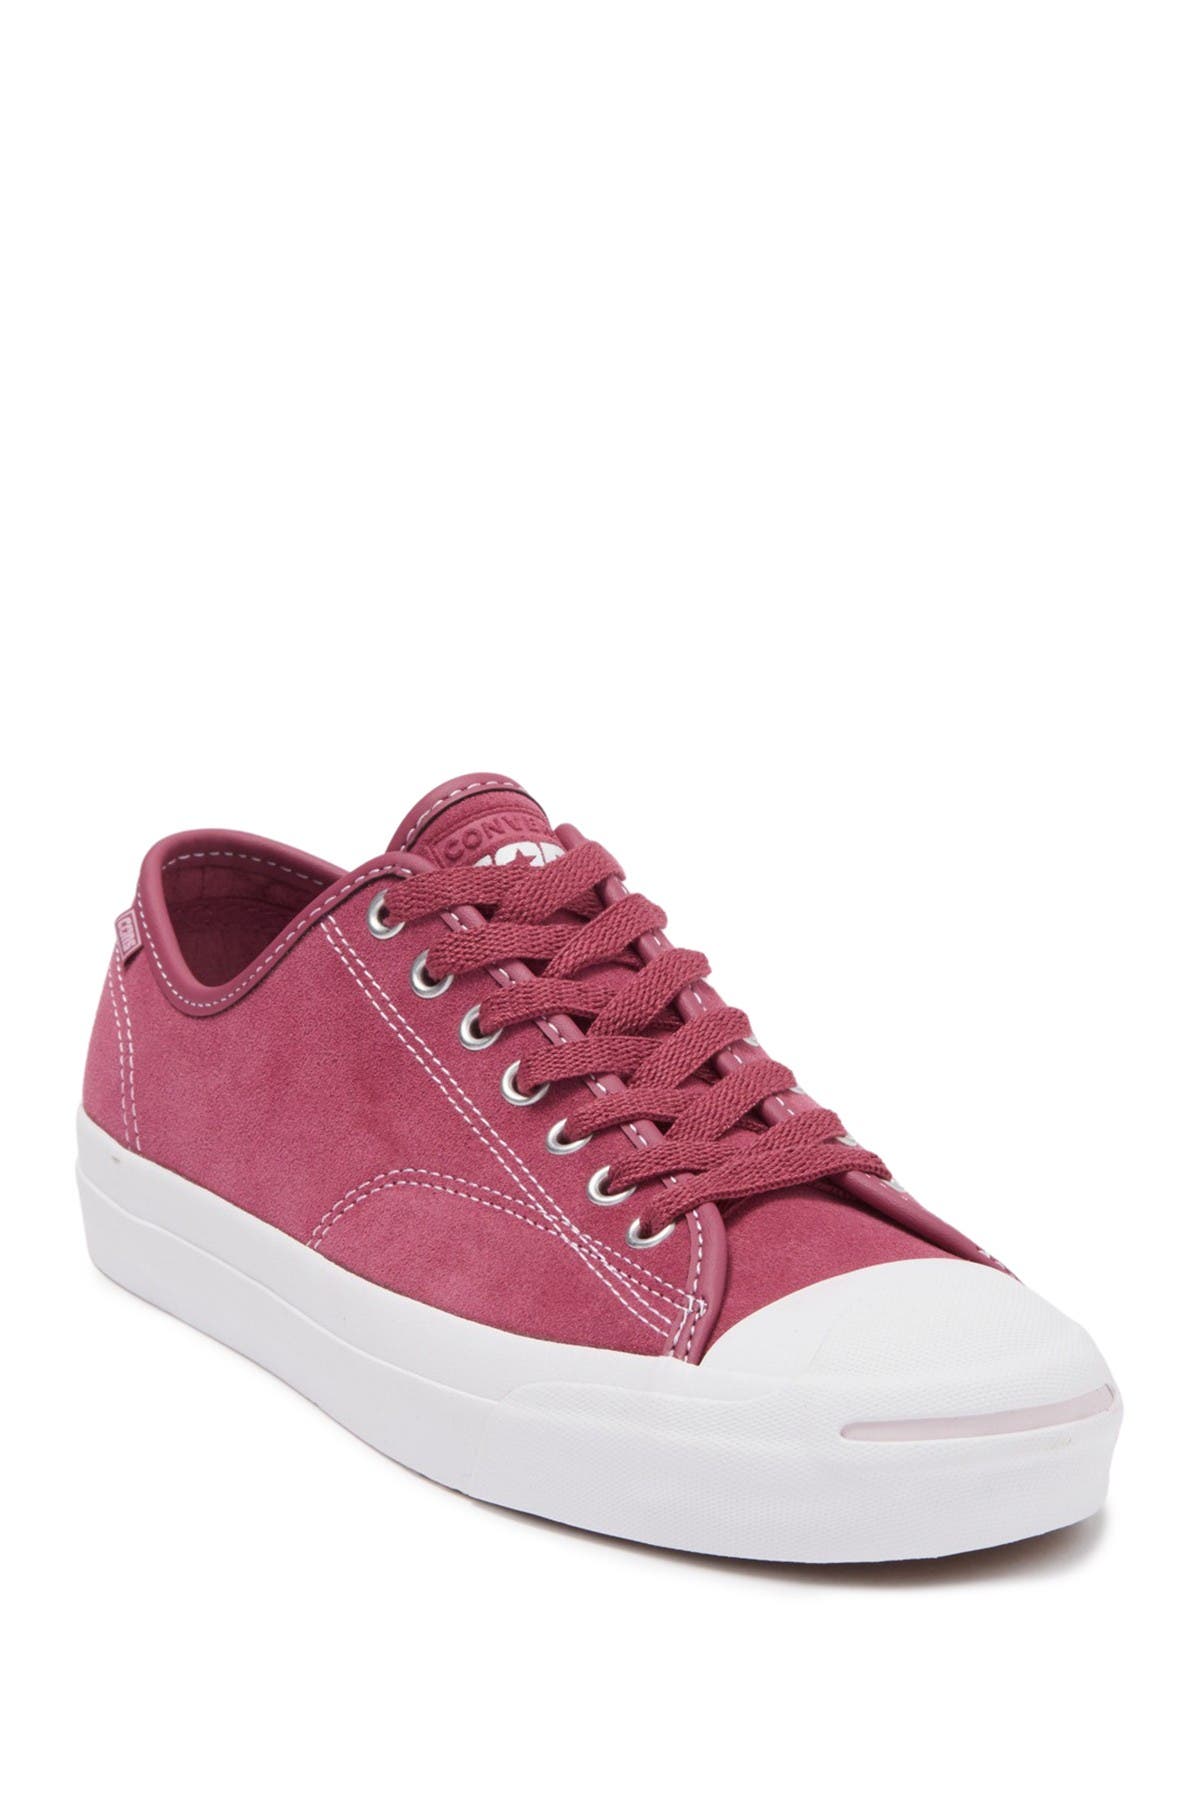 Jack Purcell Pro Suede Oxford Sneaker 